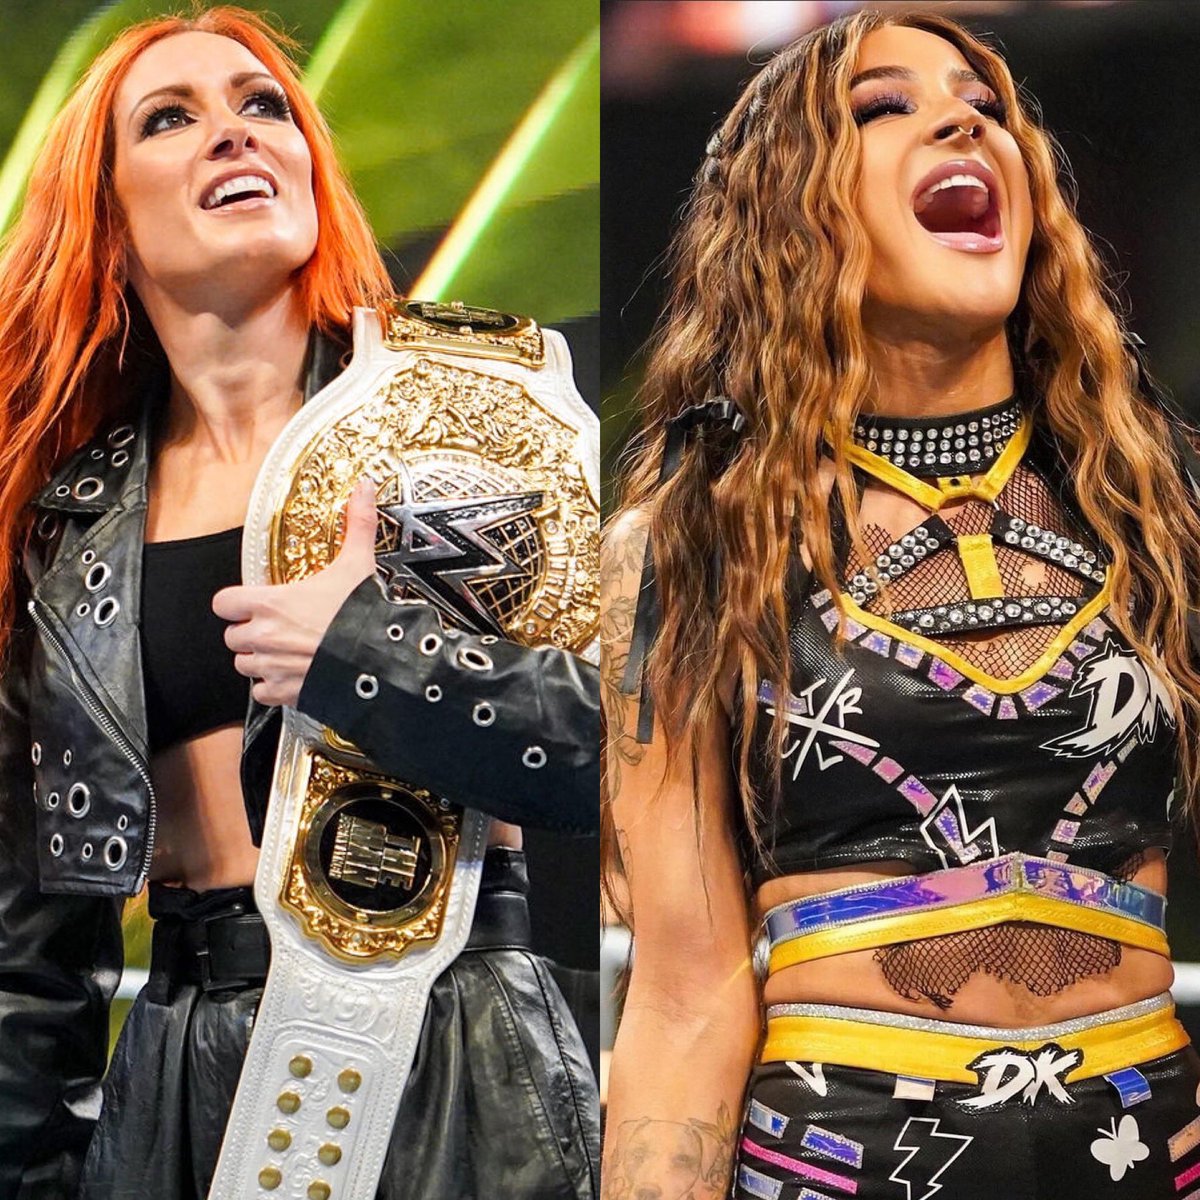 Women’s World Champion Becky Lynch will face Dakota Kai for the first time ever tonight on #WWERAW.